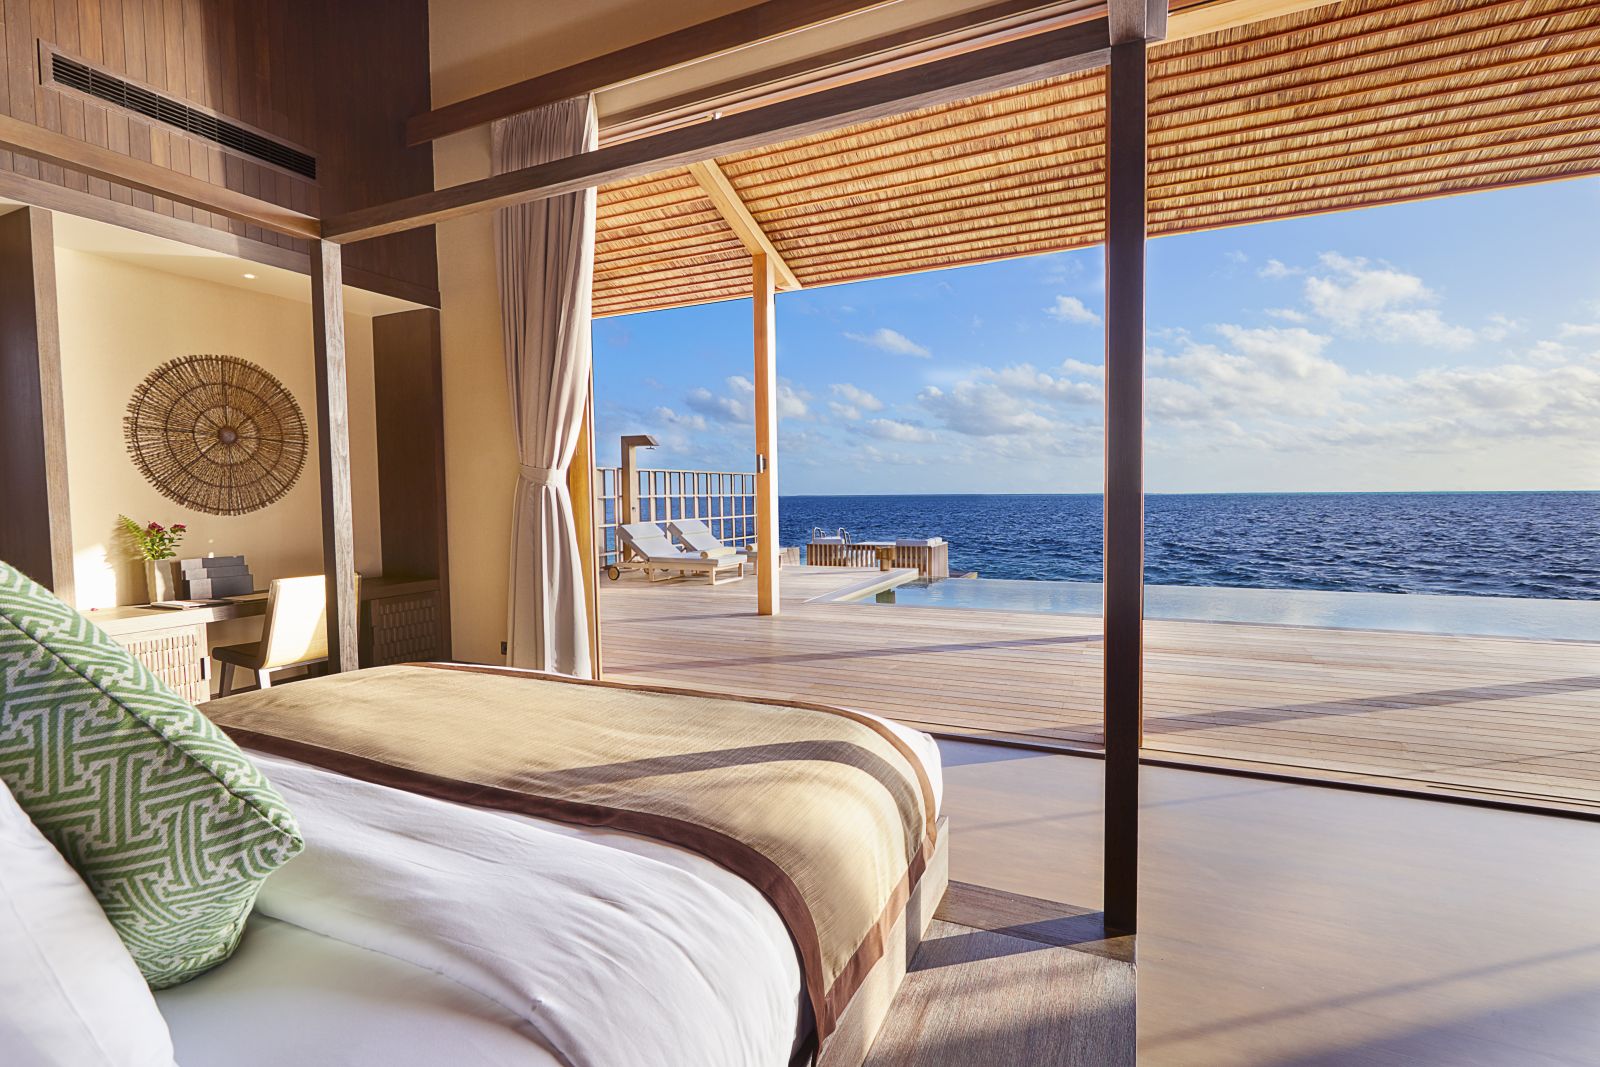 Ocean view from the bedroom of a residence at Kudadoo Maldives Private Island